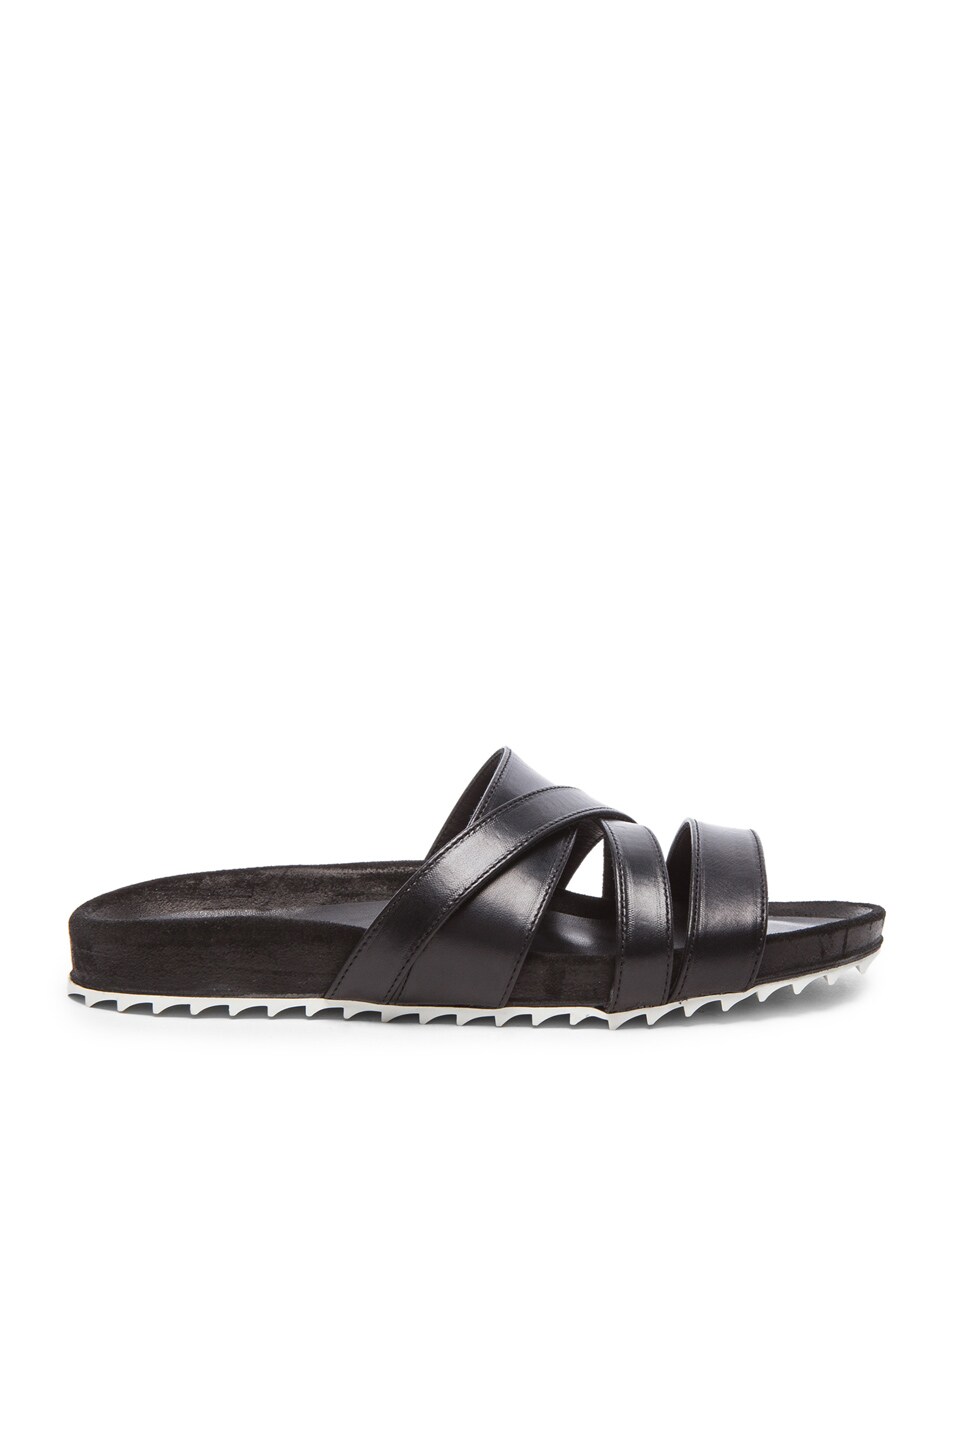 Band of Outsiders Strappy Shower Leather Slides in Black | FWRD